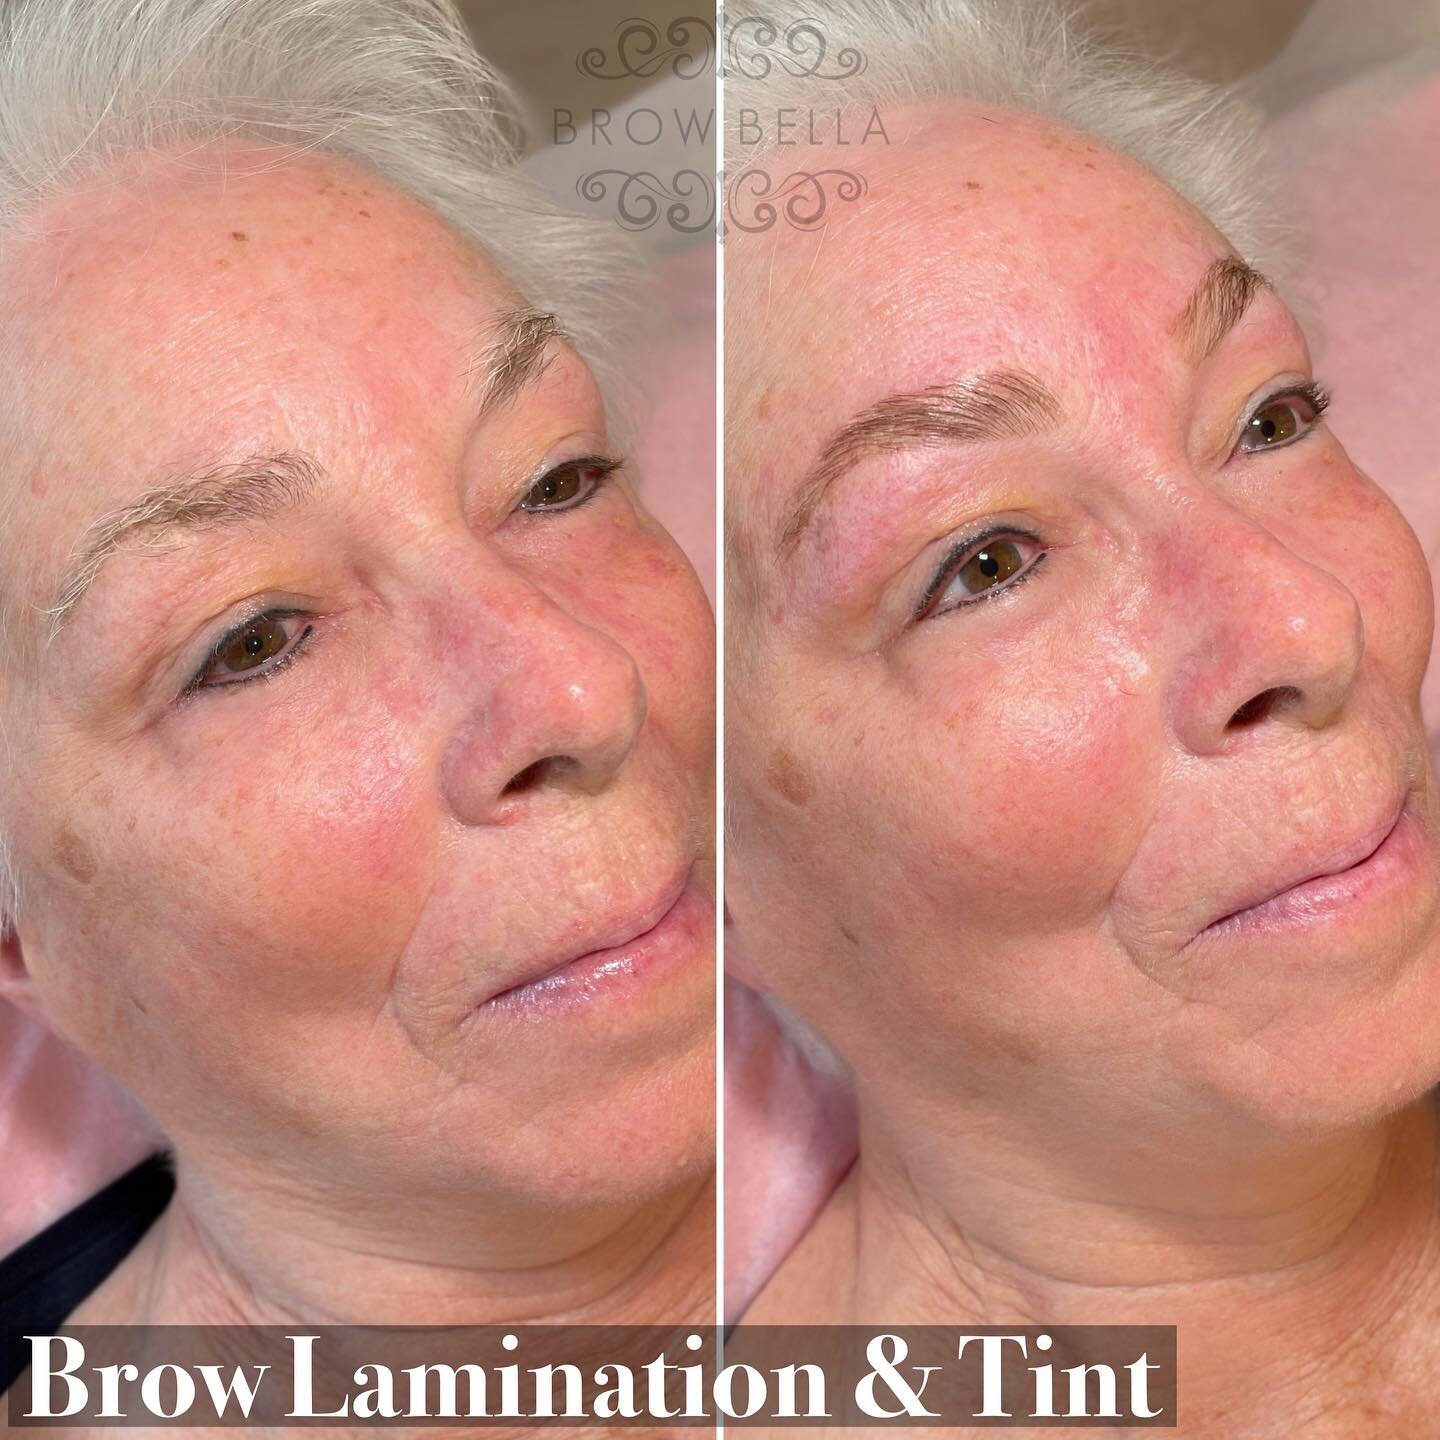 Is a Brow Lamination for you?
#BrowLaminations are a long term styling treatment of the brows lasting about 8 weeks or longer. They are great for unruly or coarse and wirey brows. We pair the treatment with a shaping and tint and infuse them with ker